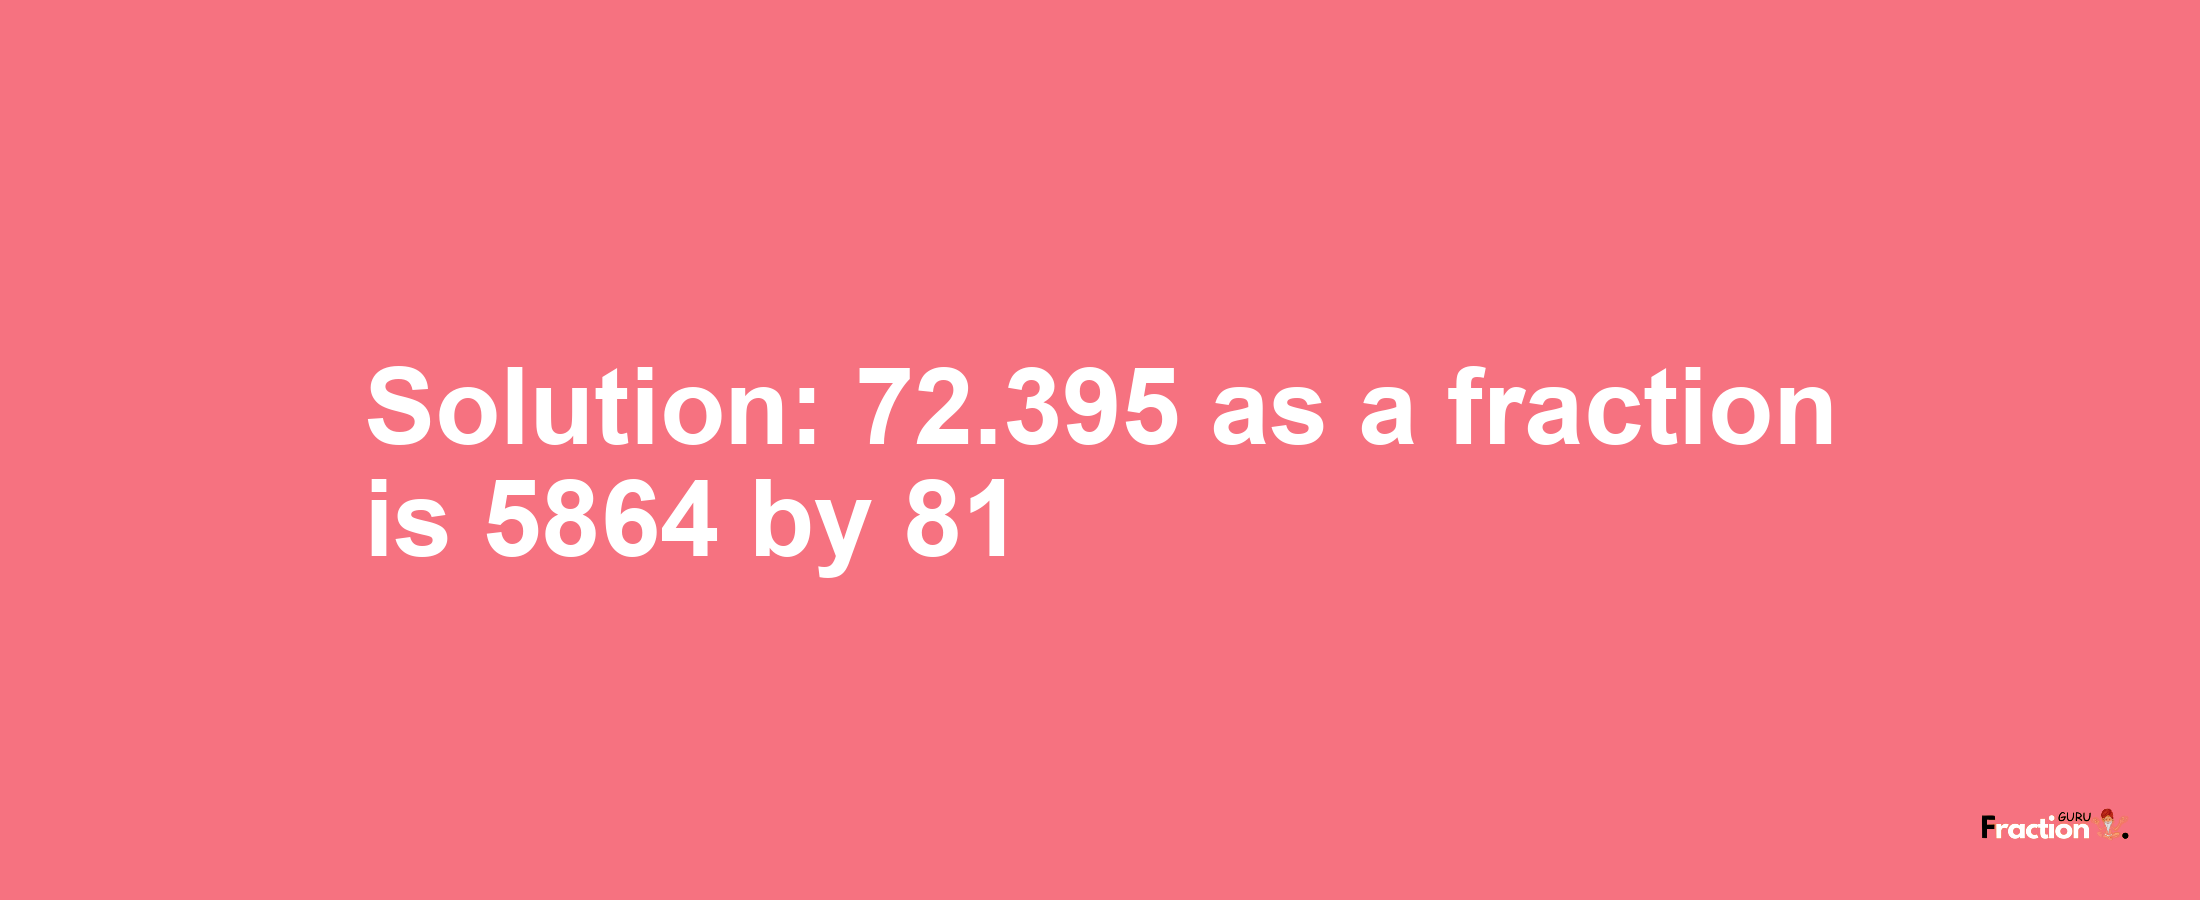 Solution:72.395 as a fraction is 5864/81